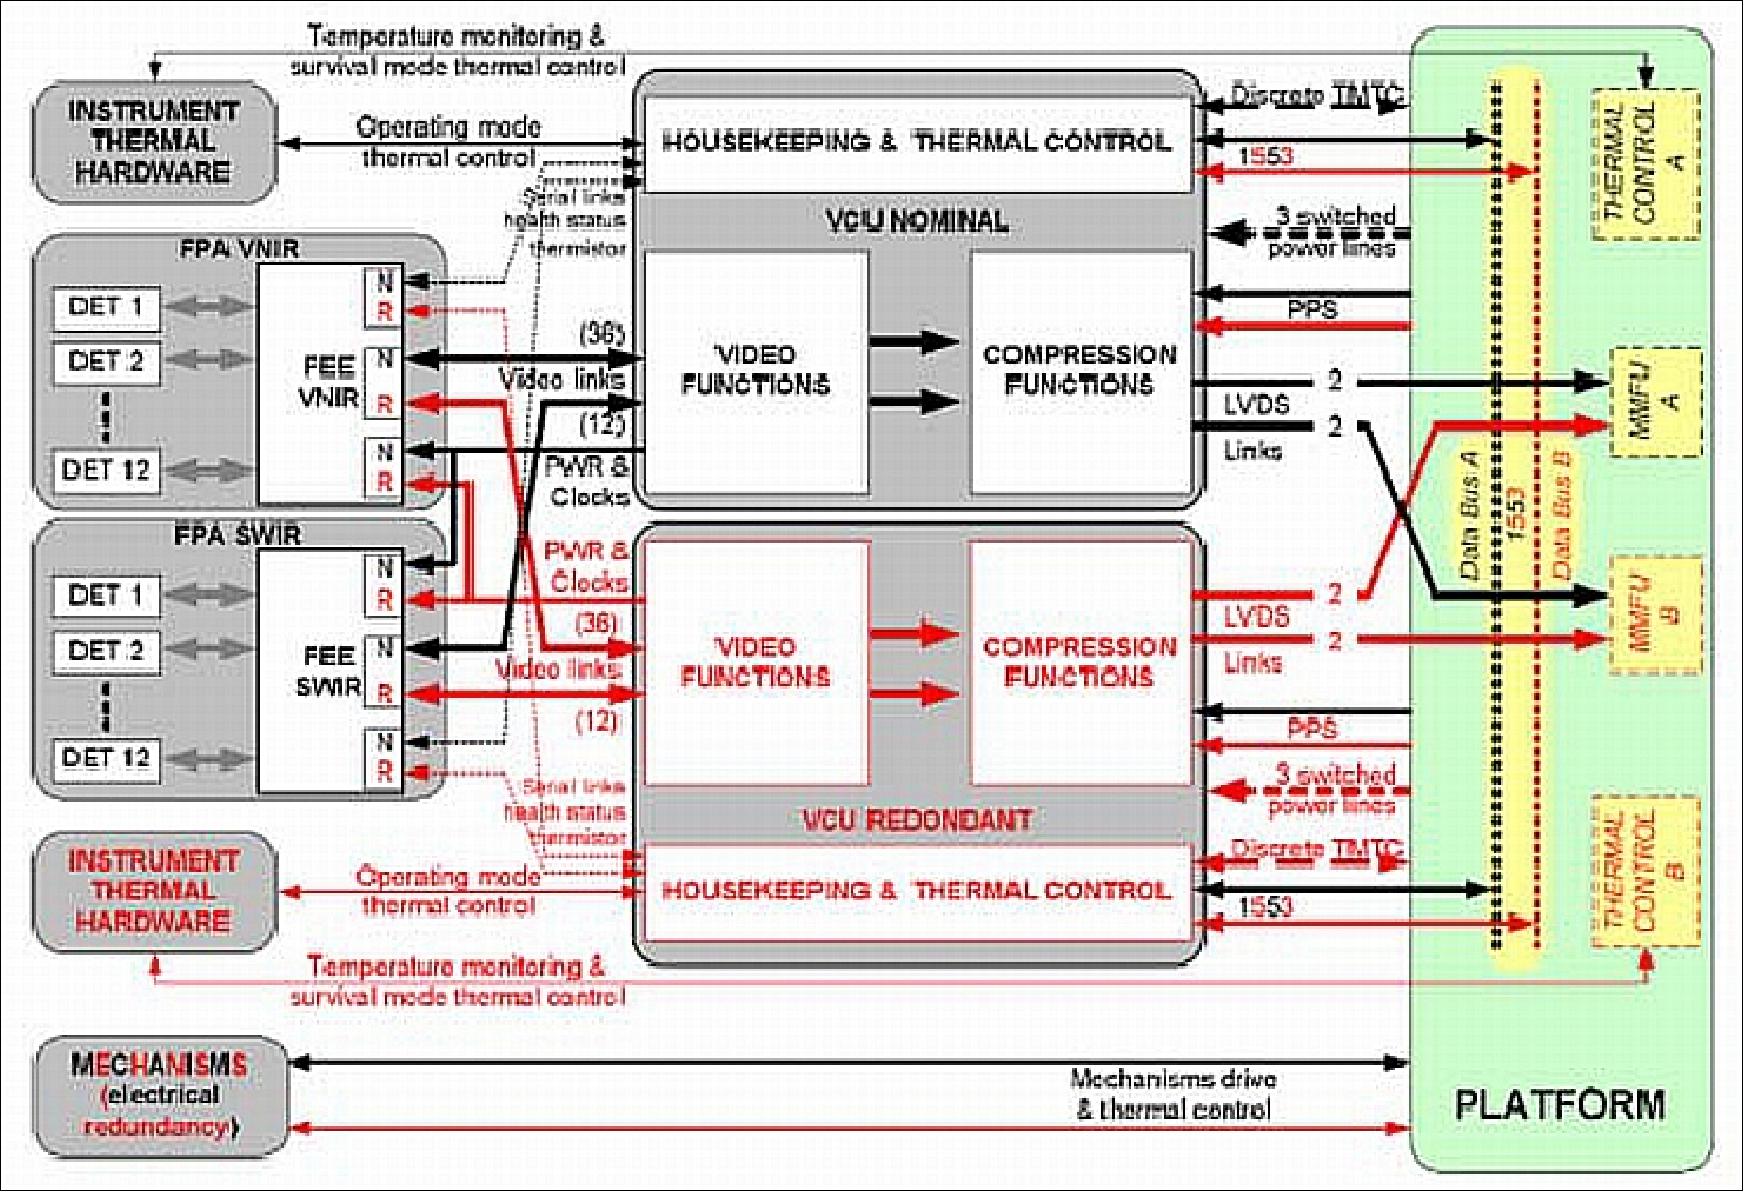 MSI electrical architecture